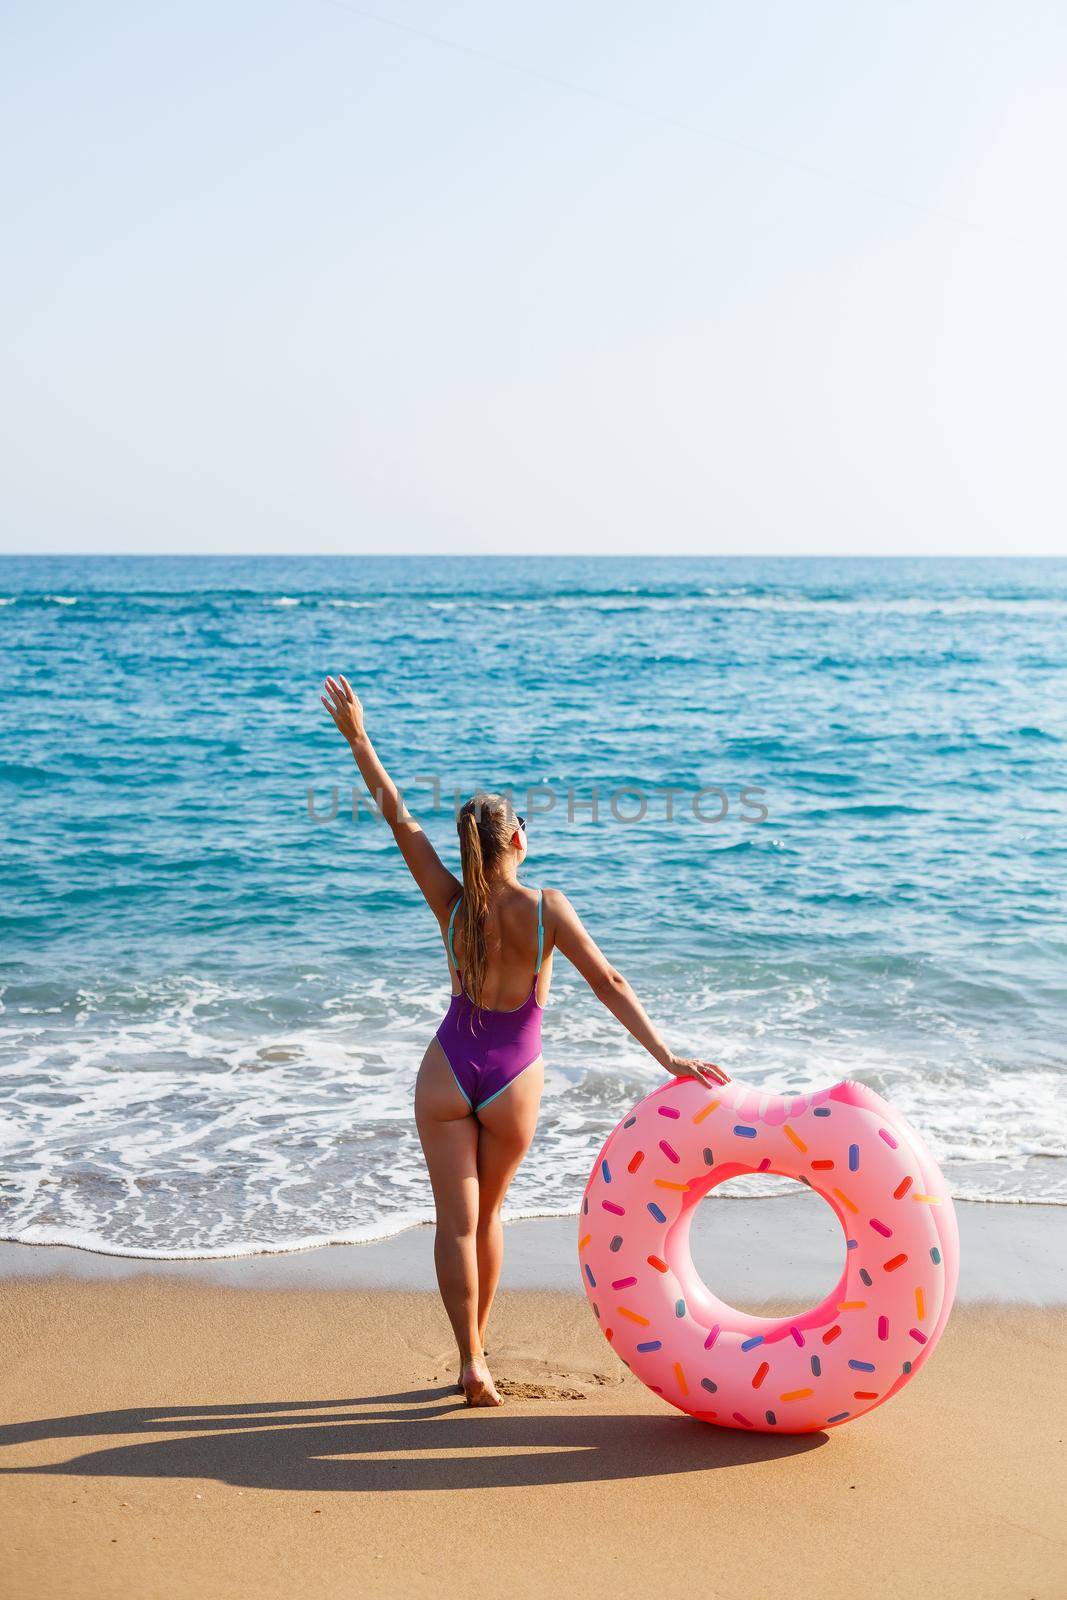 Attractive young woman in a bright swimsuit posing on the beach with an inflatable ring. Beautiful blond woman with long hair relaxing by the ocean. The concept of a sports model, swimwear